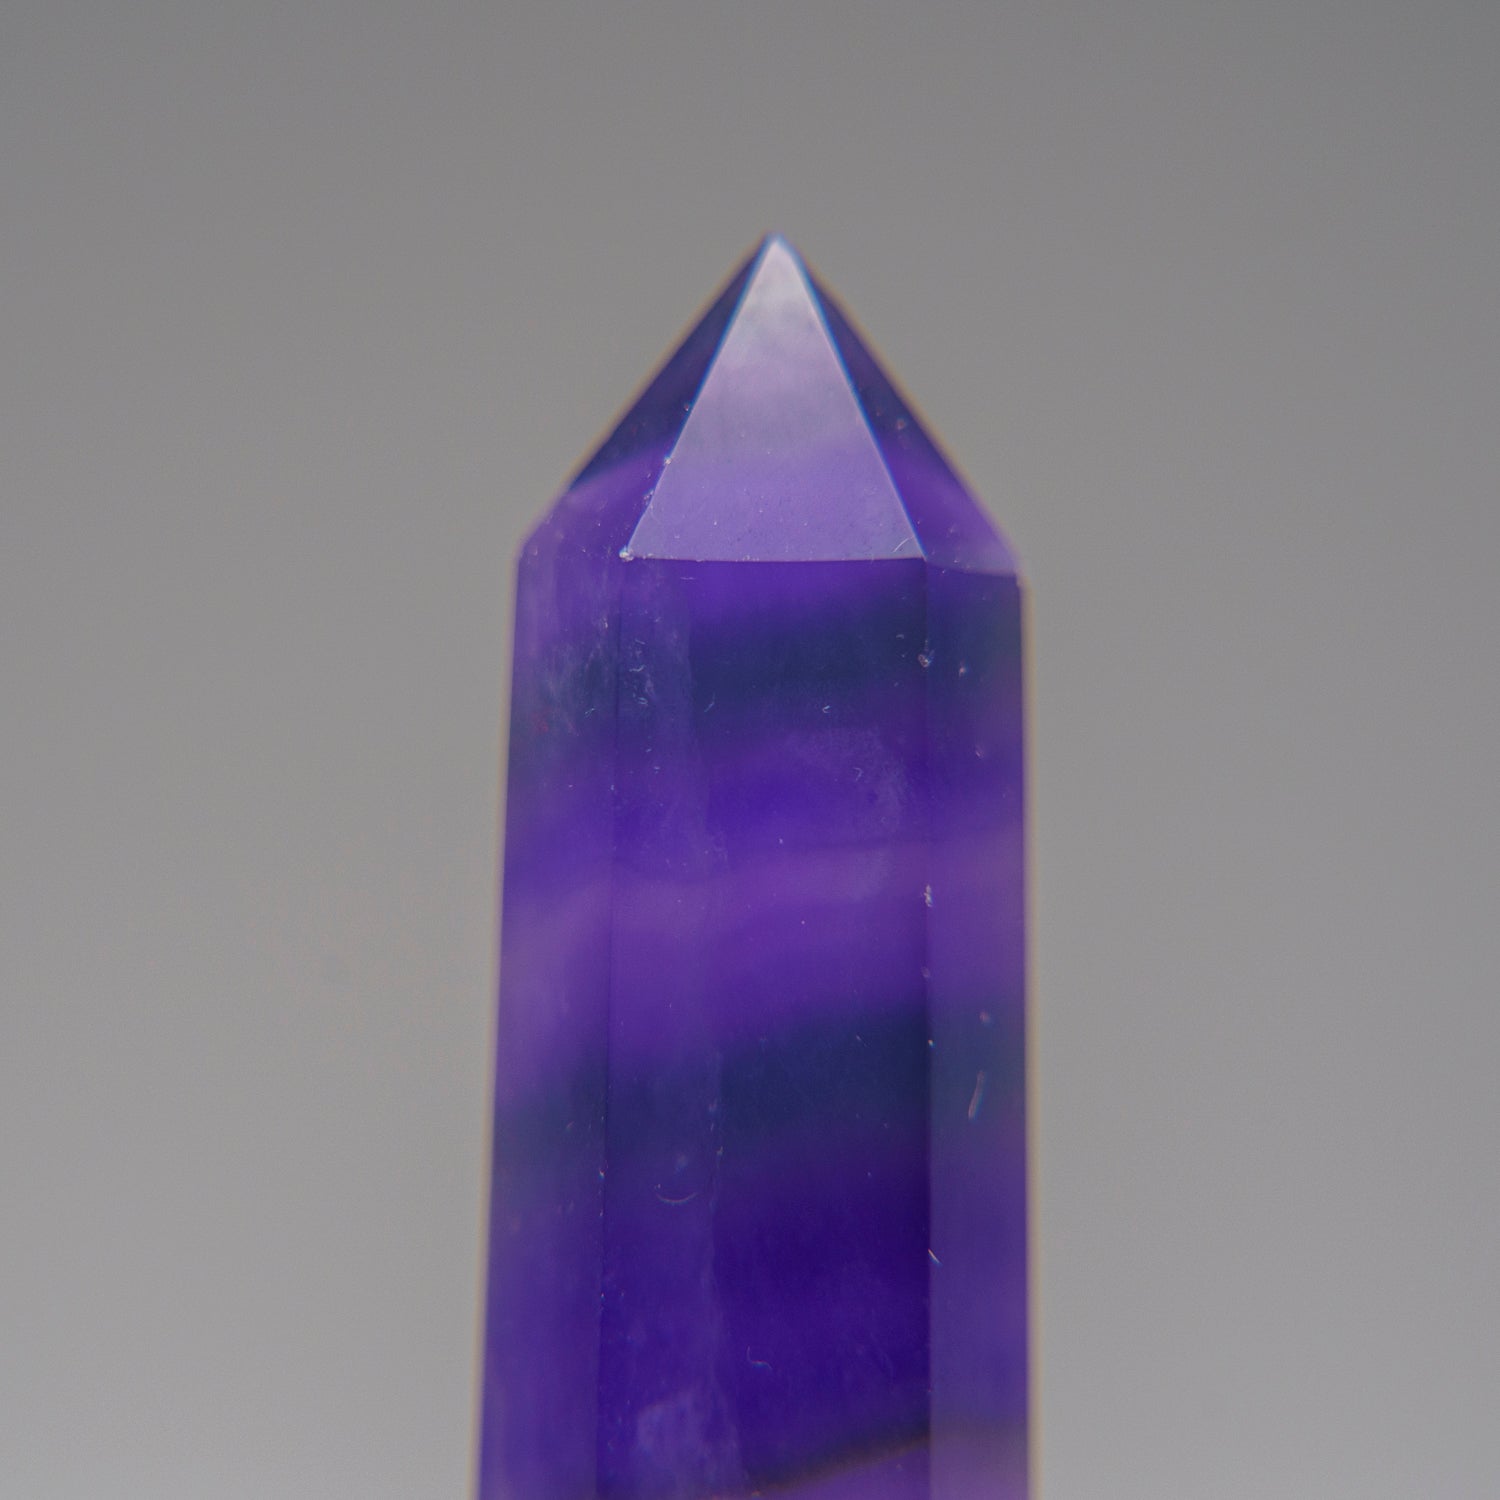 Genuine Polished Purple Fluorite Point from China (93 grams)